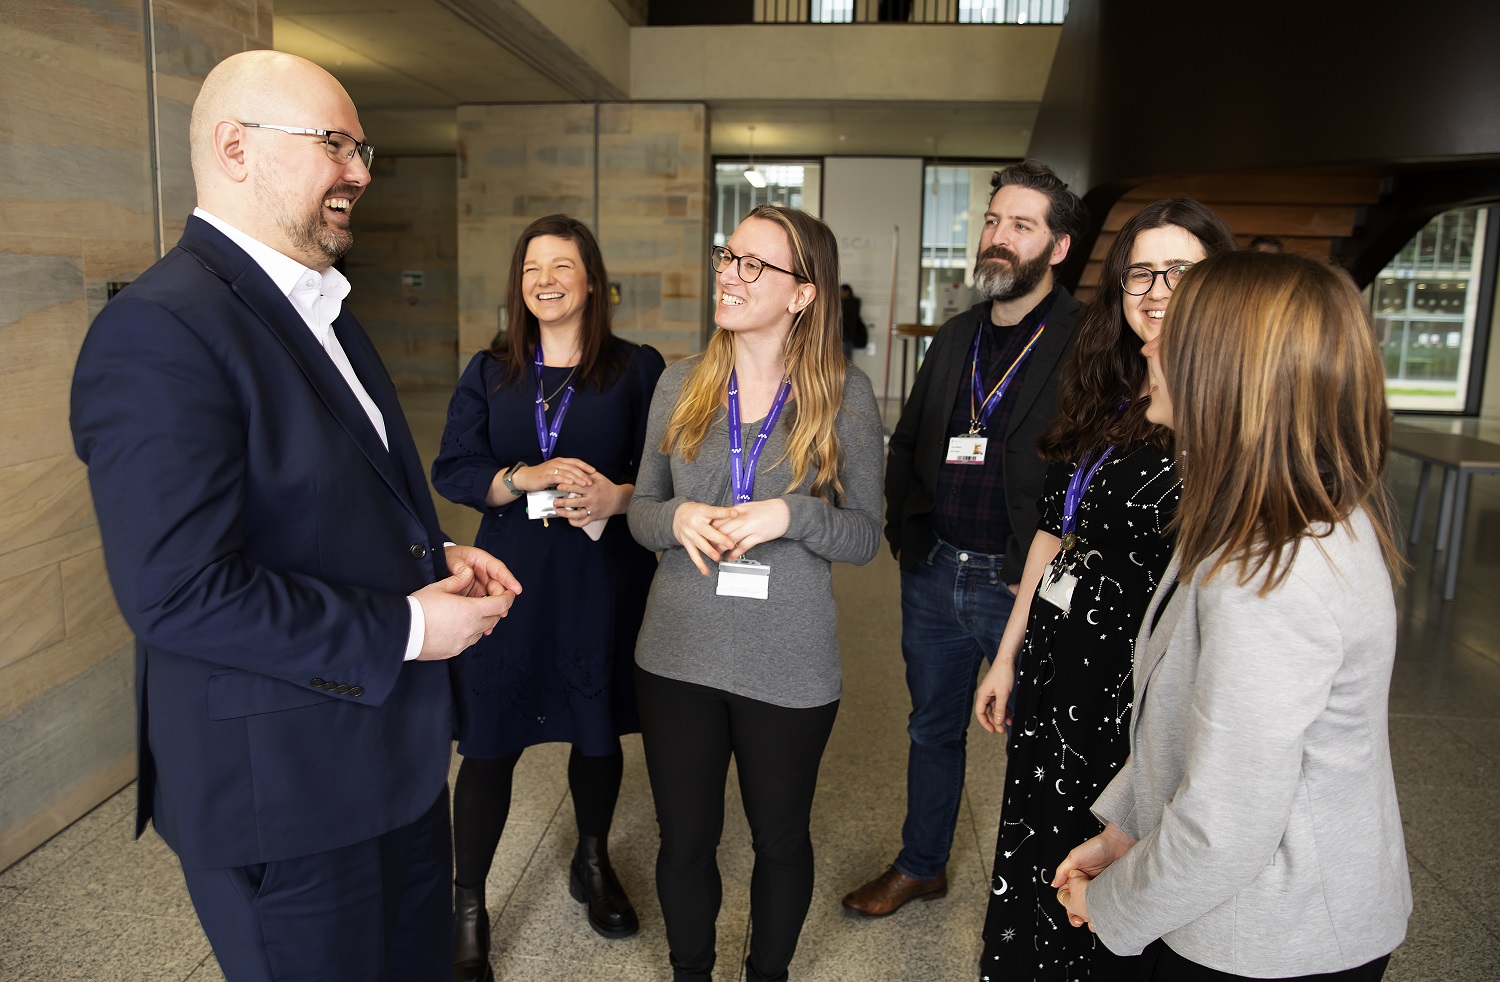 Jonathan White, Director of Library and Cultural Services and University of Essex Librarian converses with four female and one male colleagues in the Silberrad Student Centre.